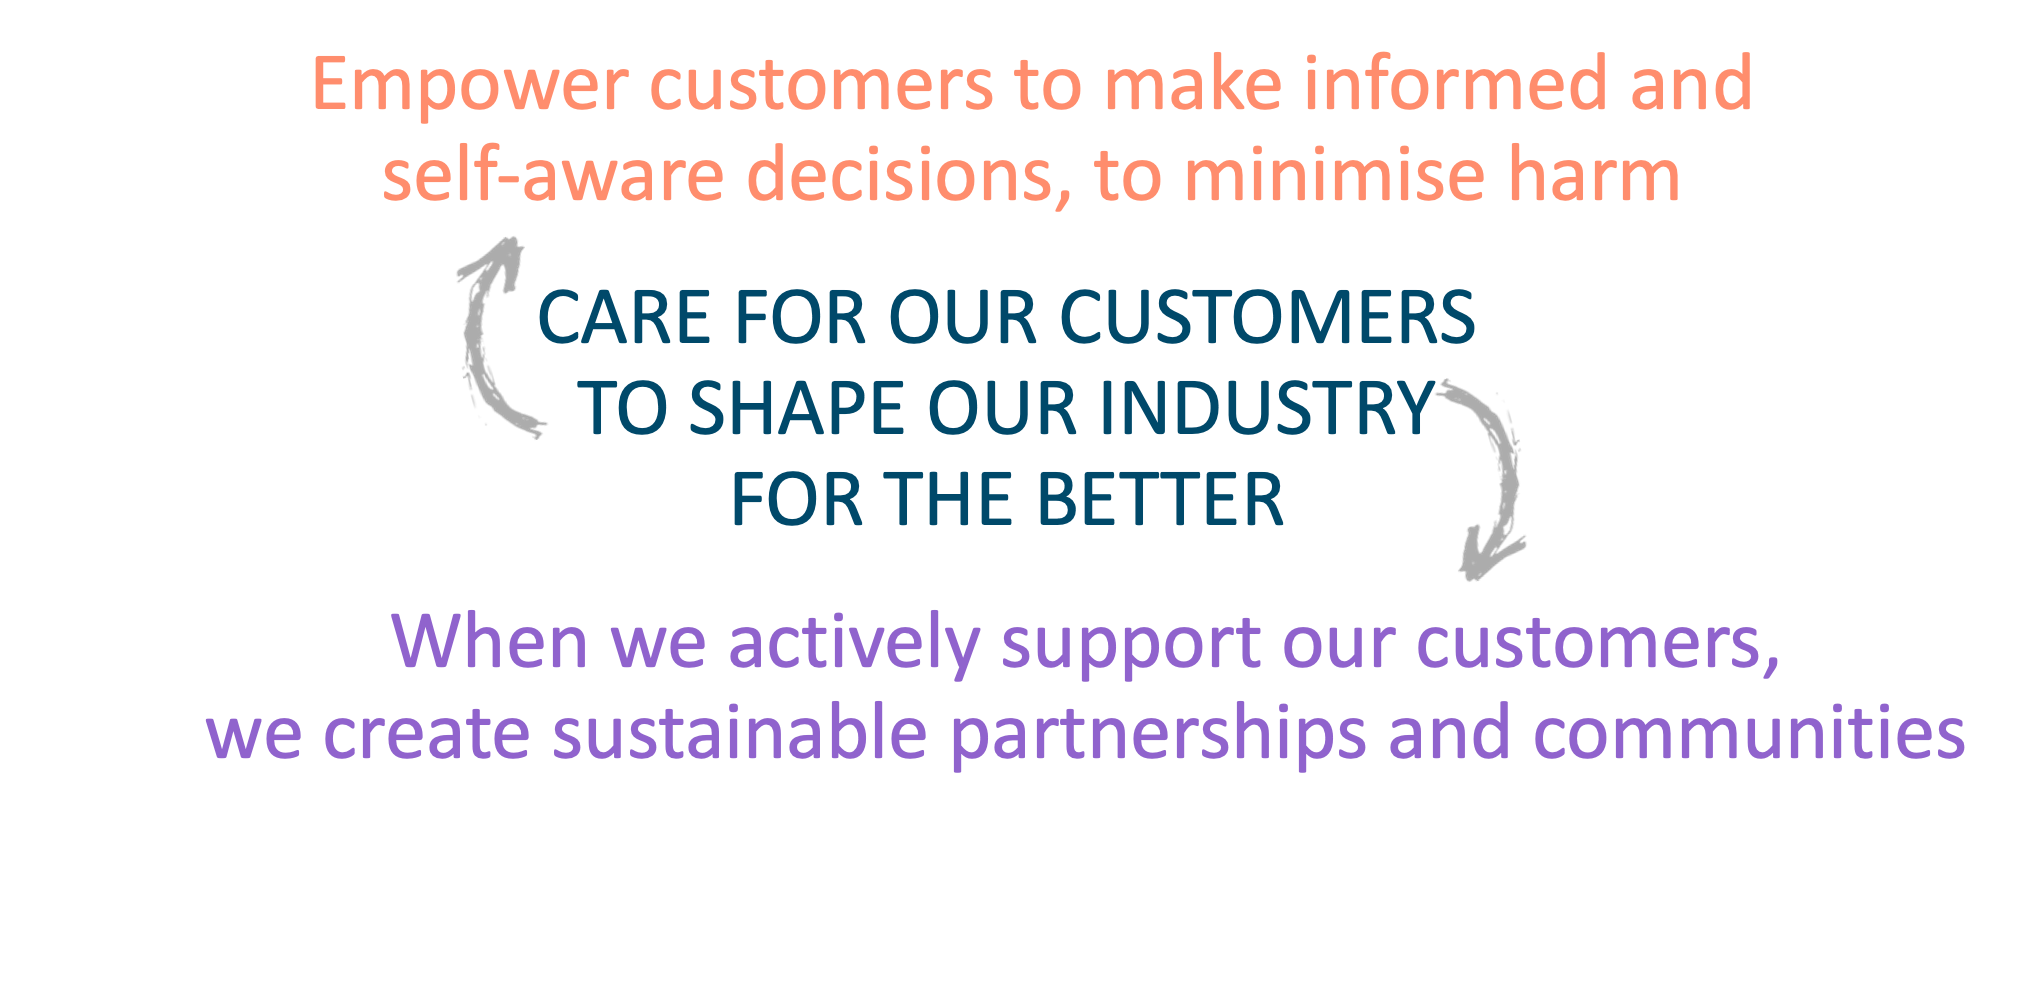 Image that explains that we care for our customers to shape our industry for the better, empower our customers to make informed and self-aware decisions, to minimise harm; and that when we actively support our customers, we create sustainable partnerships and communities.